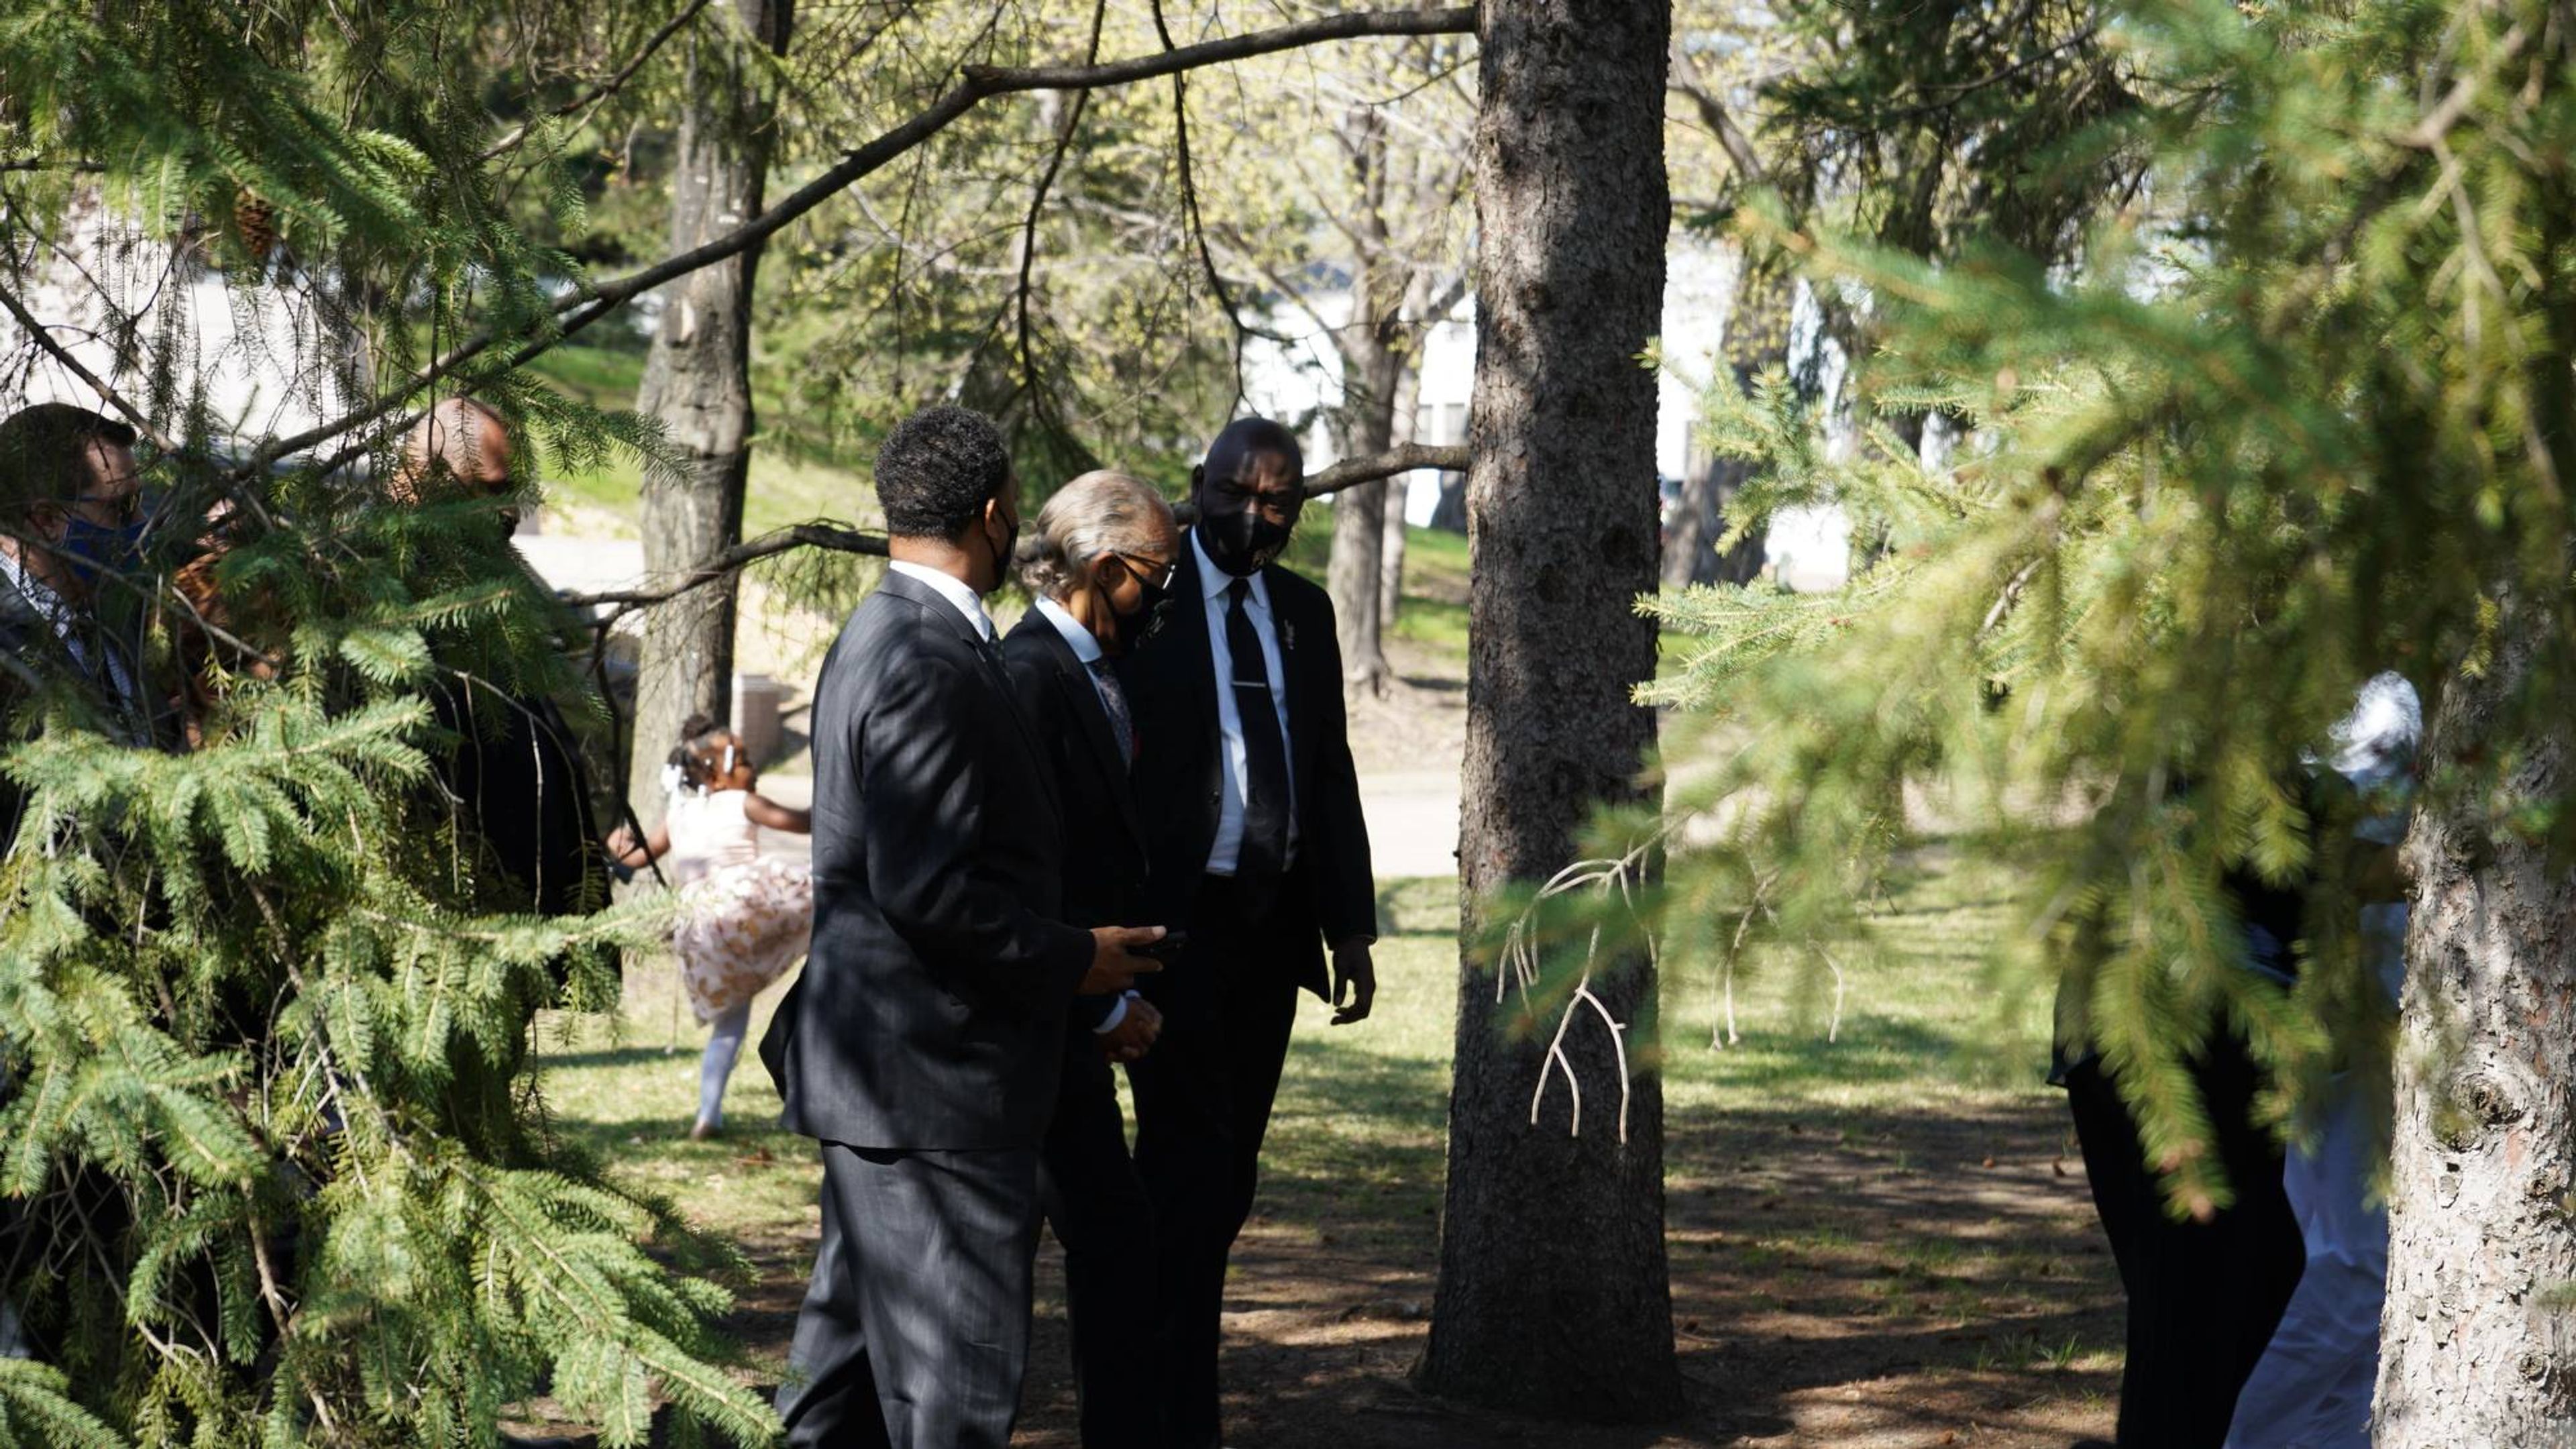 Reverend Sharpton and Attorney Ben Crump walk across the Lakewood Cemetery grounds.